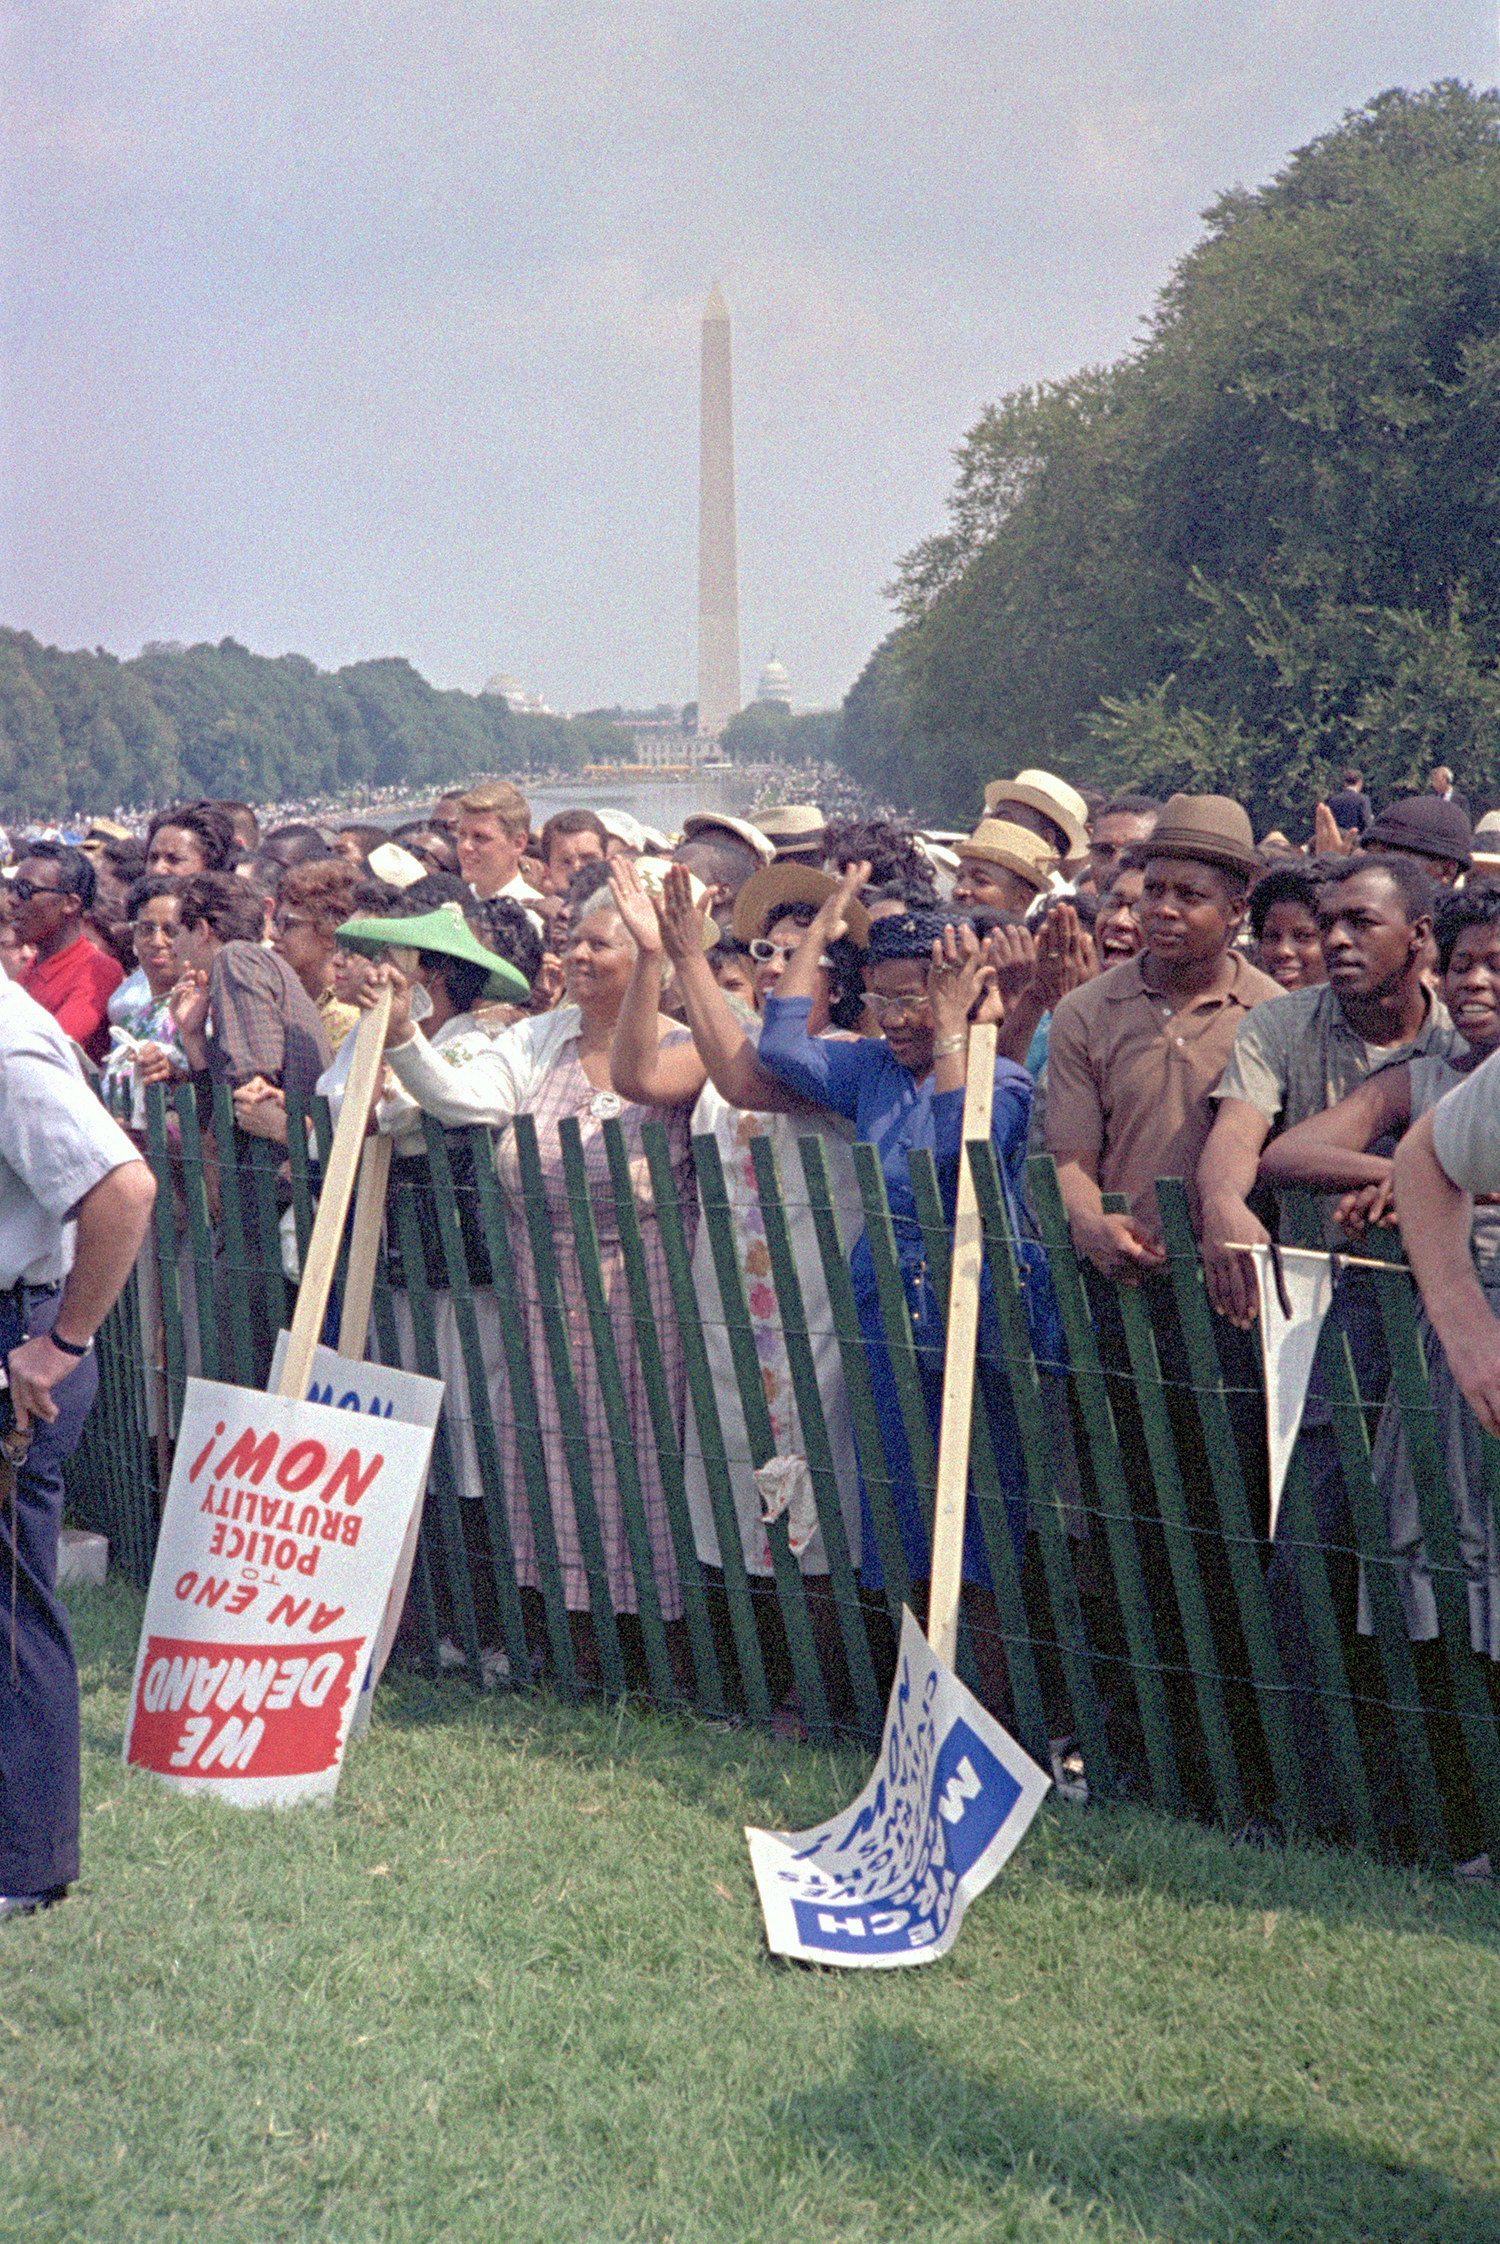 Attendees of the March on Washington are seen behind a fence.